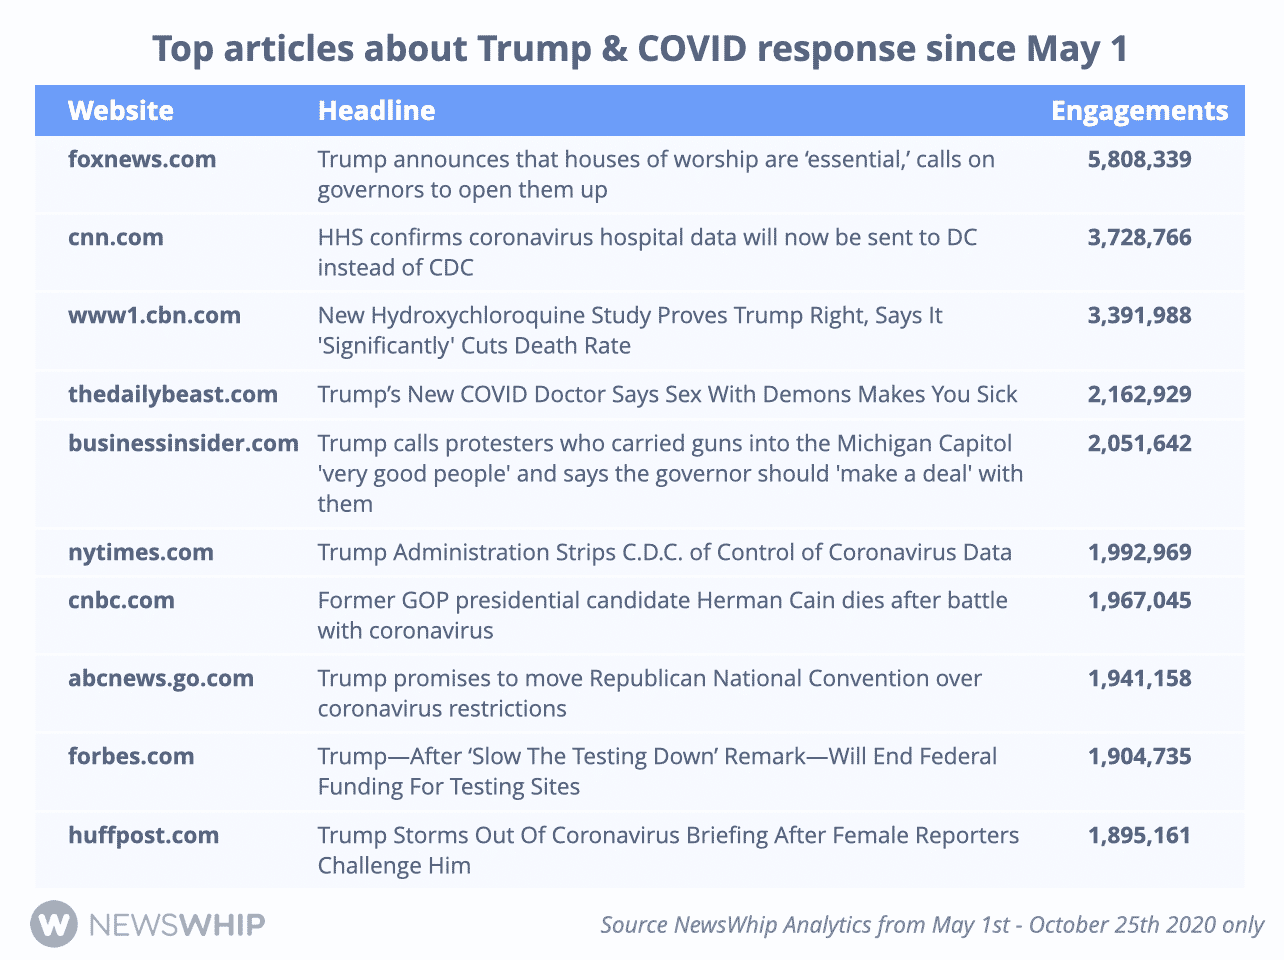 Chart showing the most engaged stories about President Trump and Covid in 2020, ranked by engagement